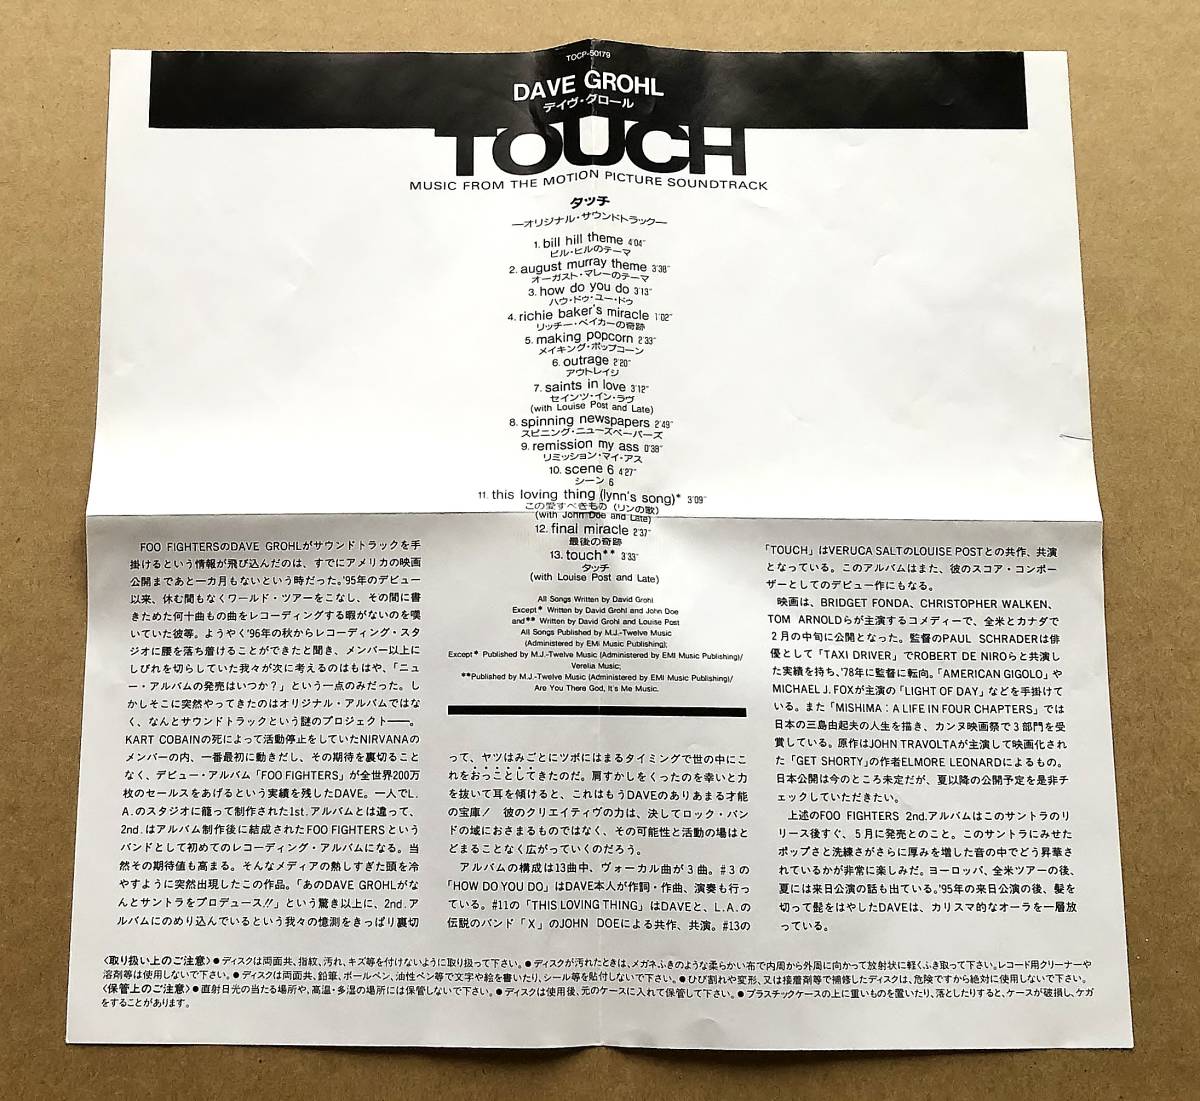 [CD] TOUCH Music From The Motion Picture Soundtrack 国内盤 by Dave Grohl (Foo Fighters, Nirvana) タッチ サウンドトラックの画像7